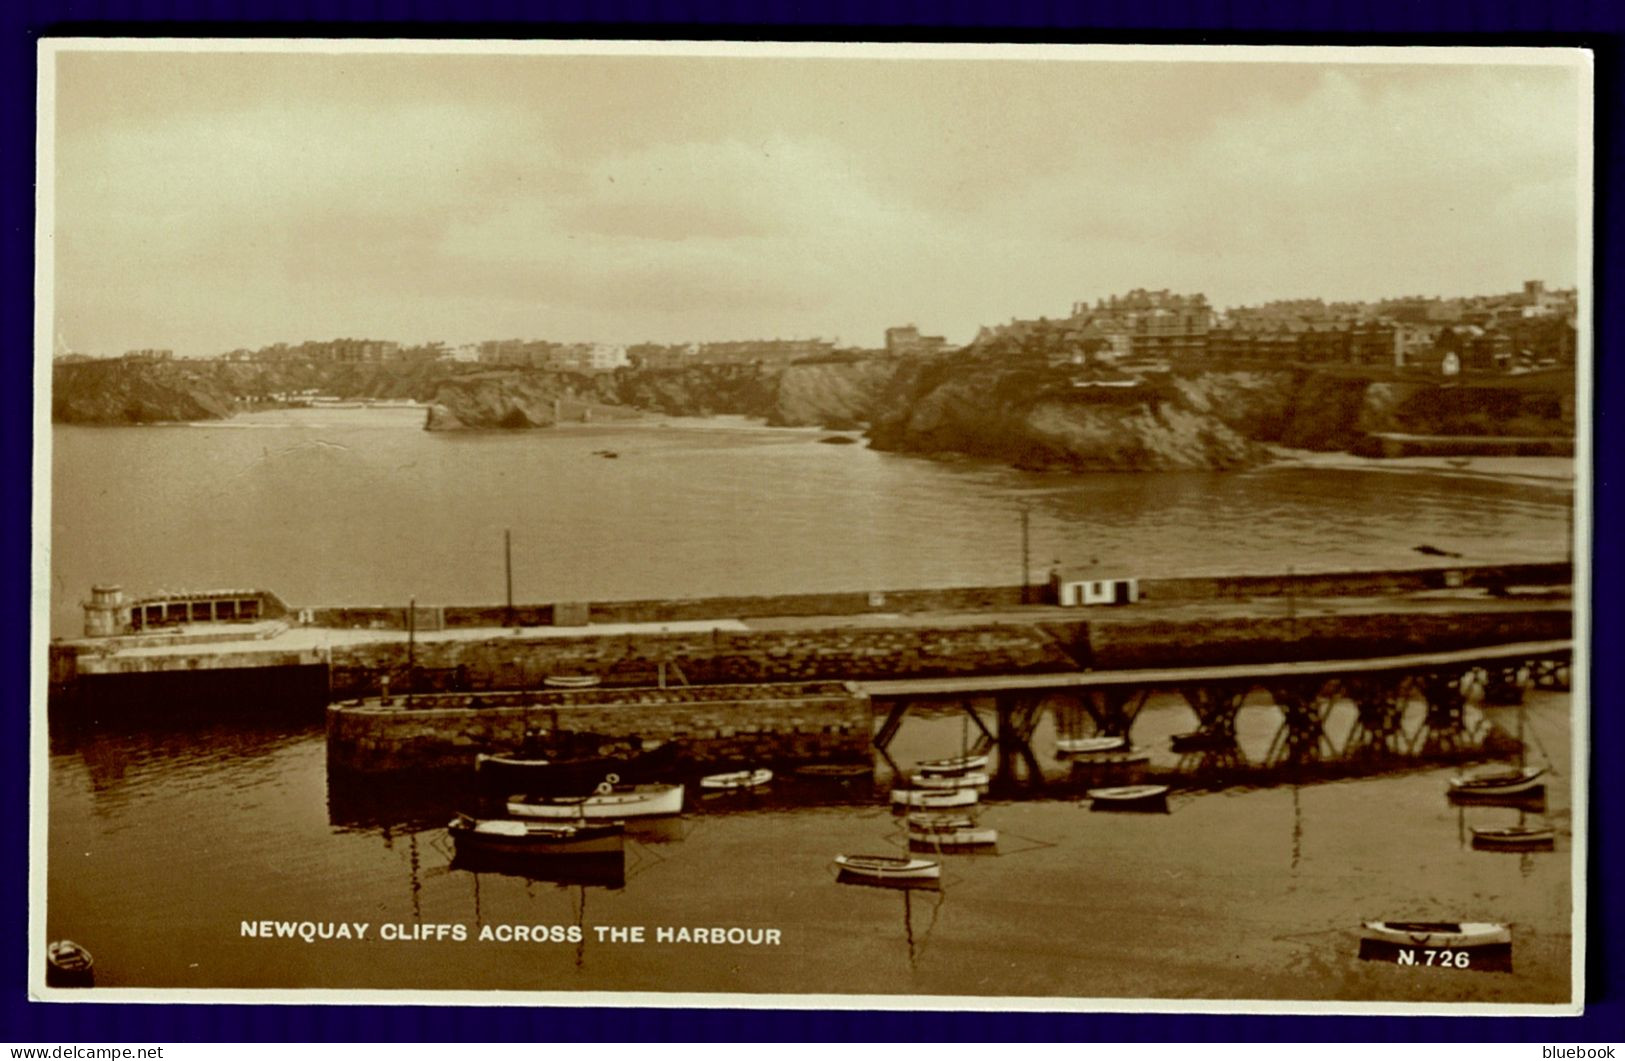 Ref 1638 - Early Postcard - Newquay Cliffs Across The Harbour - Cornwall - Newquay